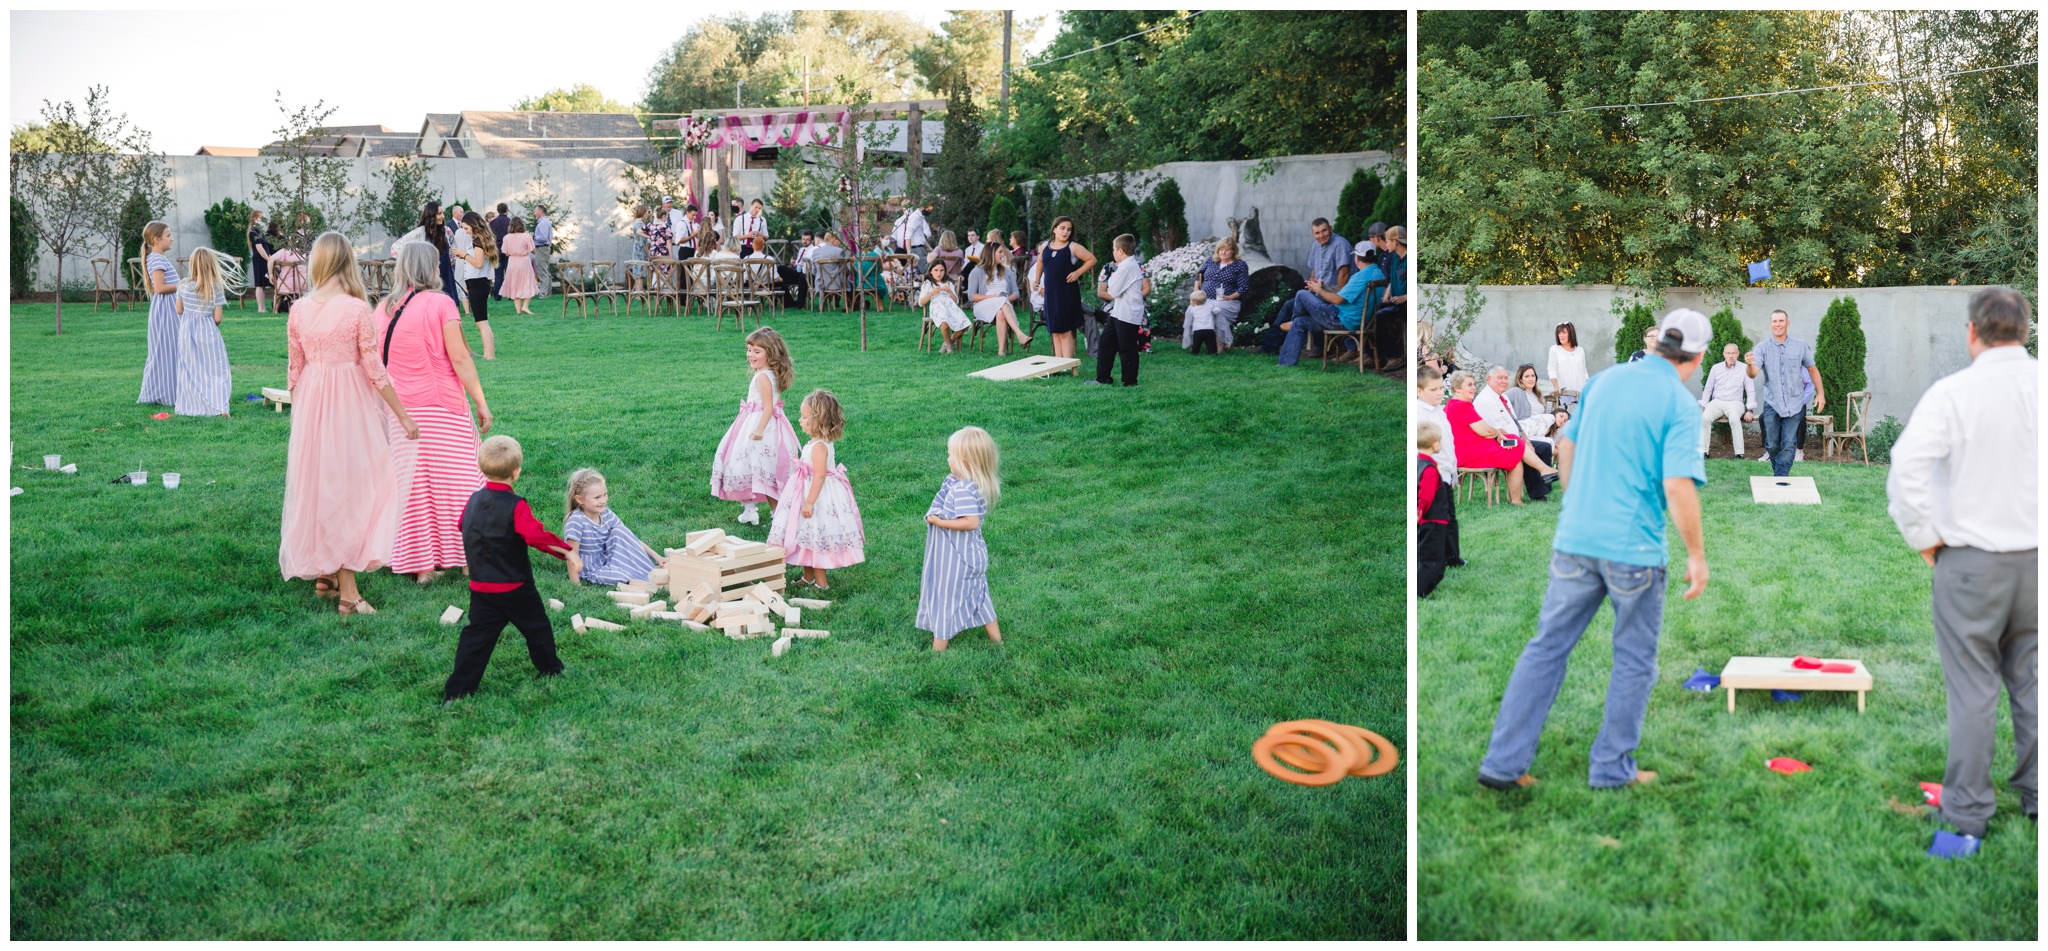 Outside yard games for Summer wedding activities for guests.